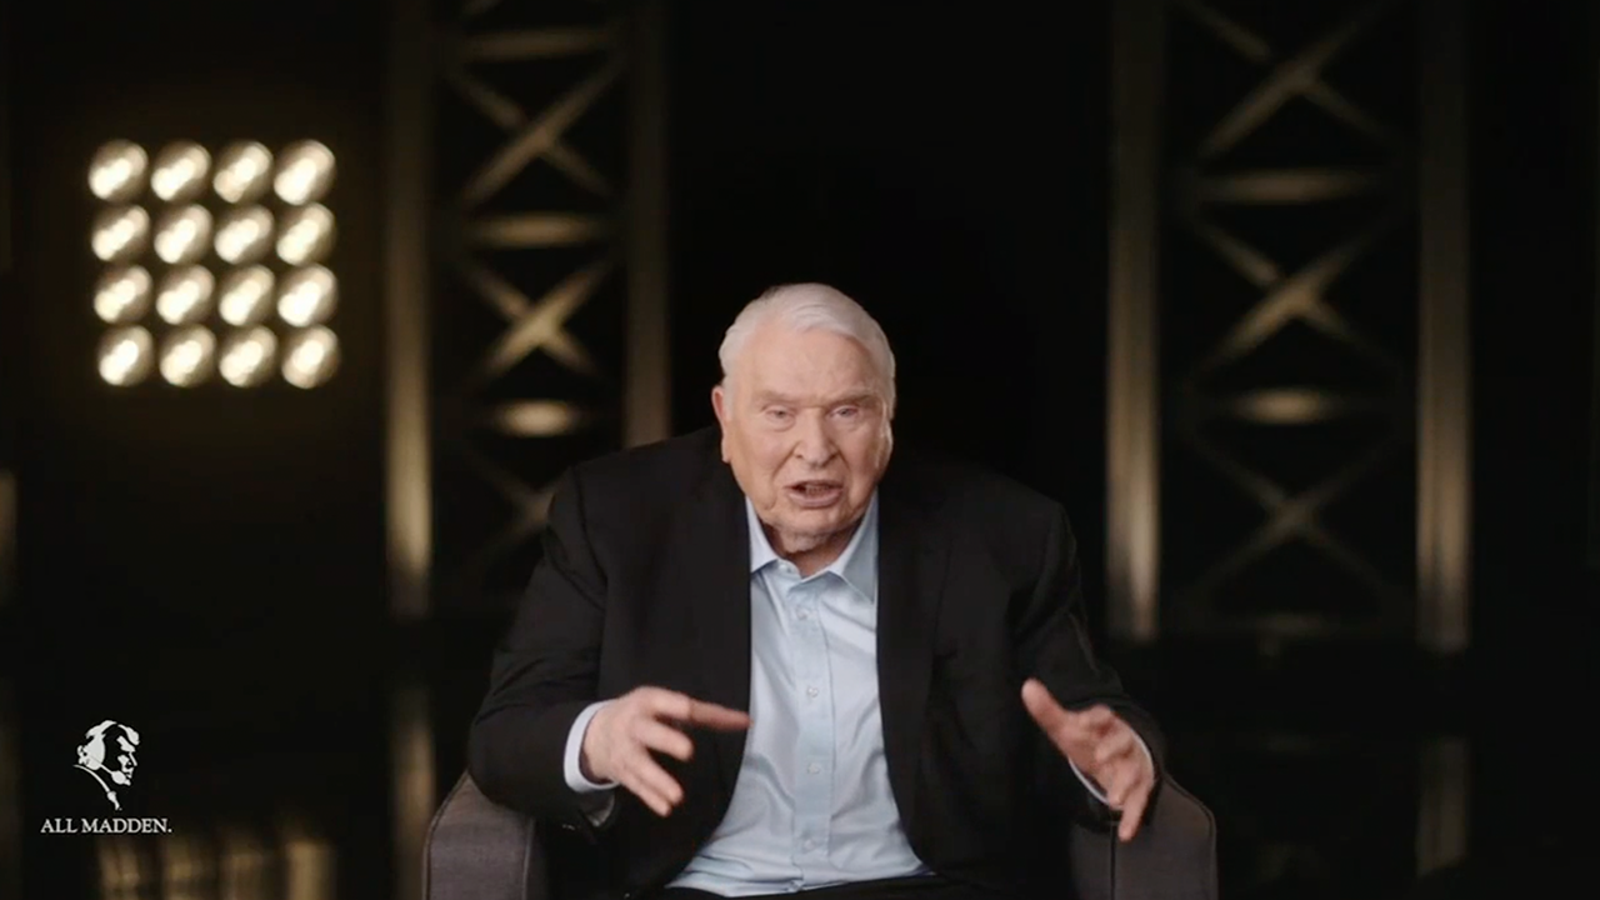 John Madden and the history of the turducken | All Madden